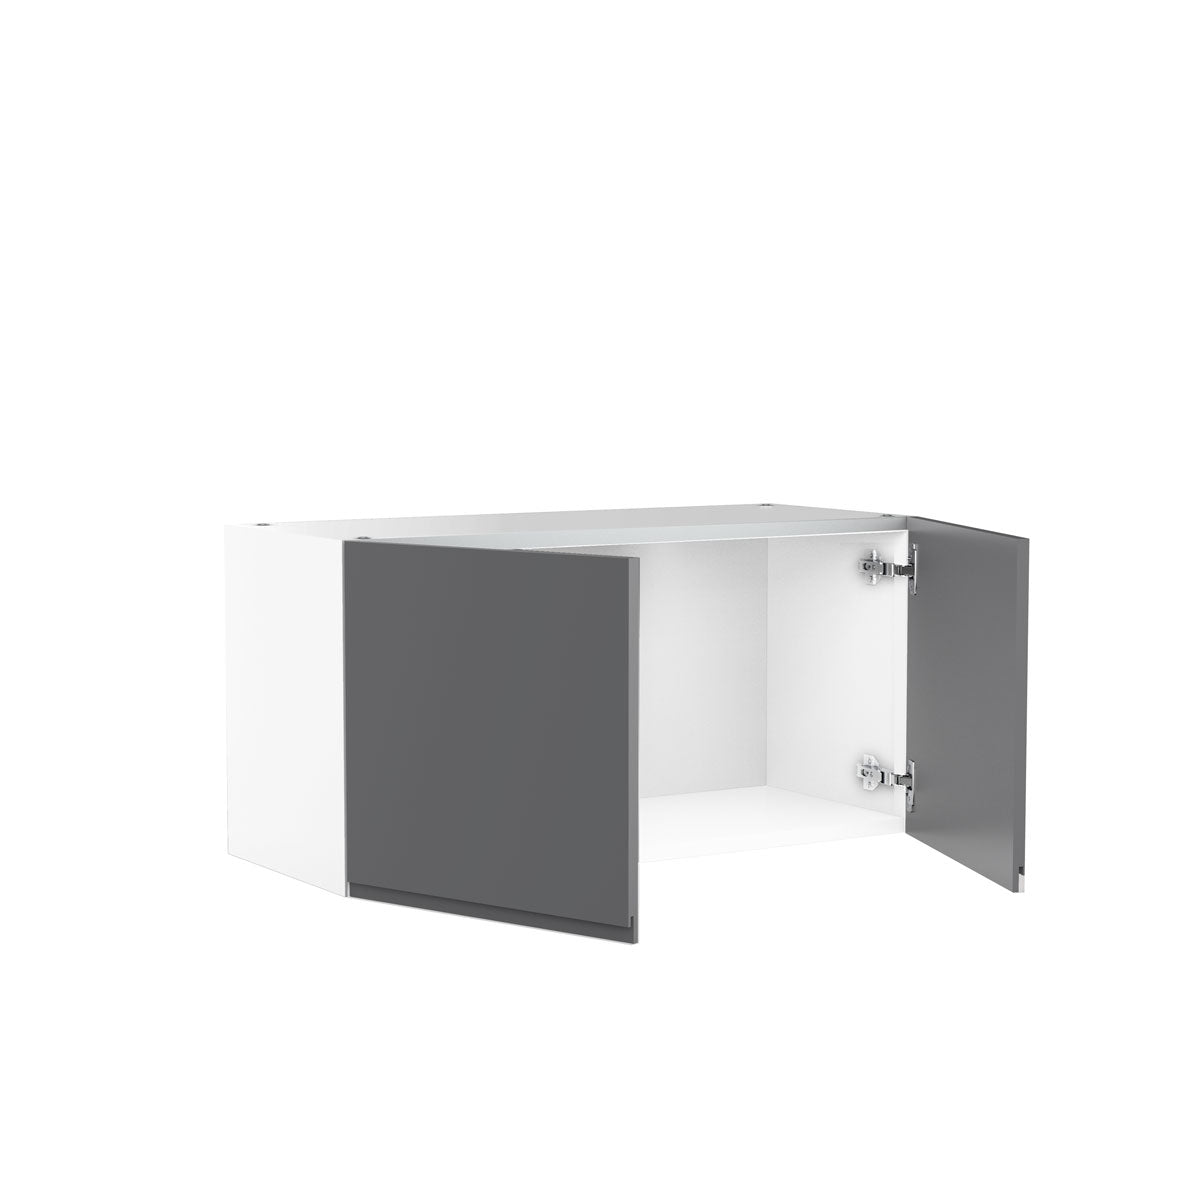 RTA - Lacquer Grey - Double Door Wall Cabinets | 30"W x 15"H x 12"D